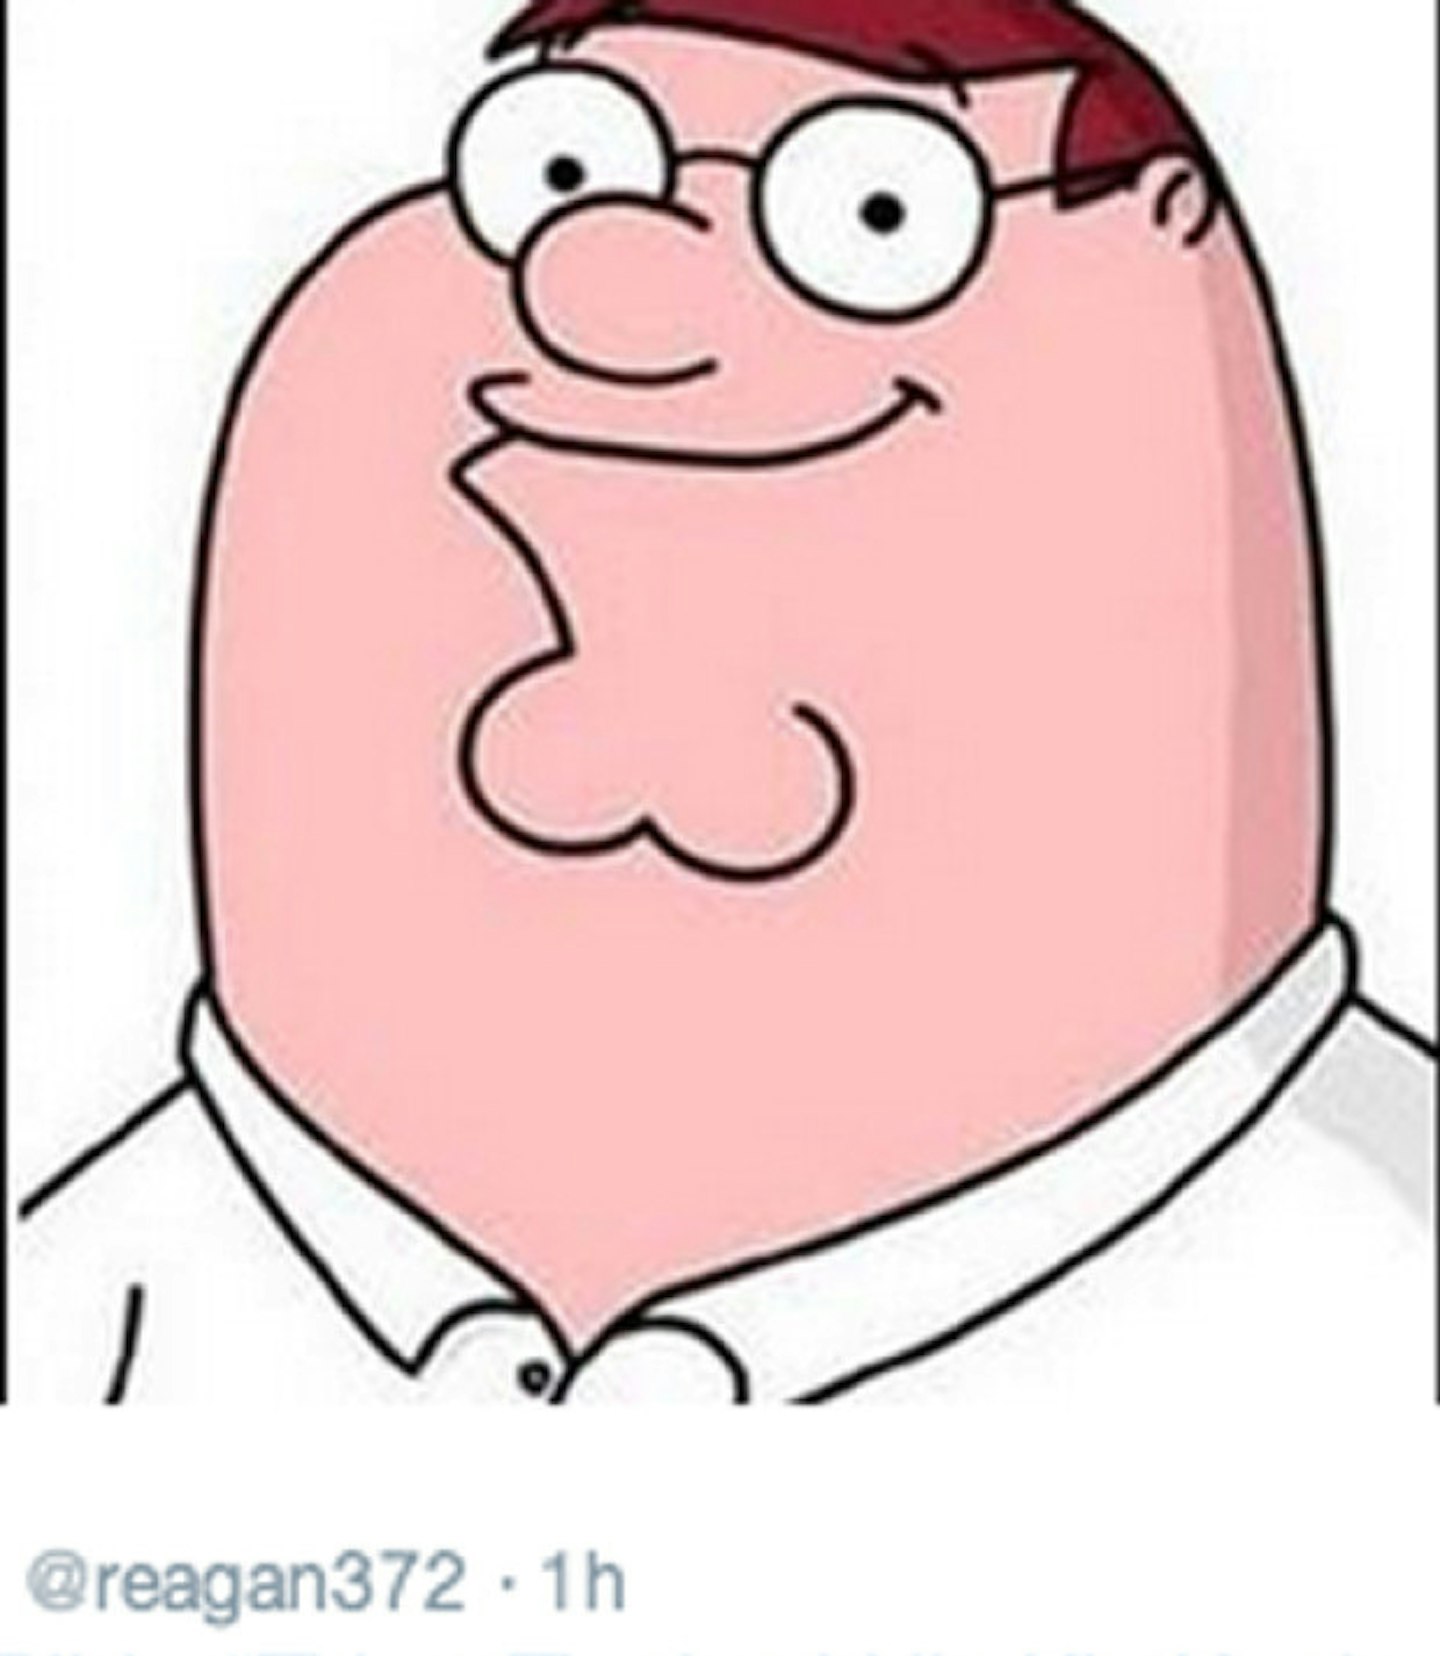 Peter Griffin's chin...